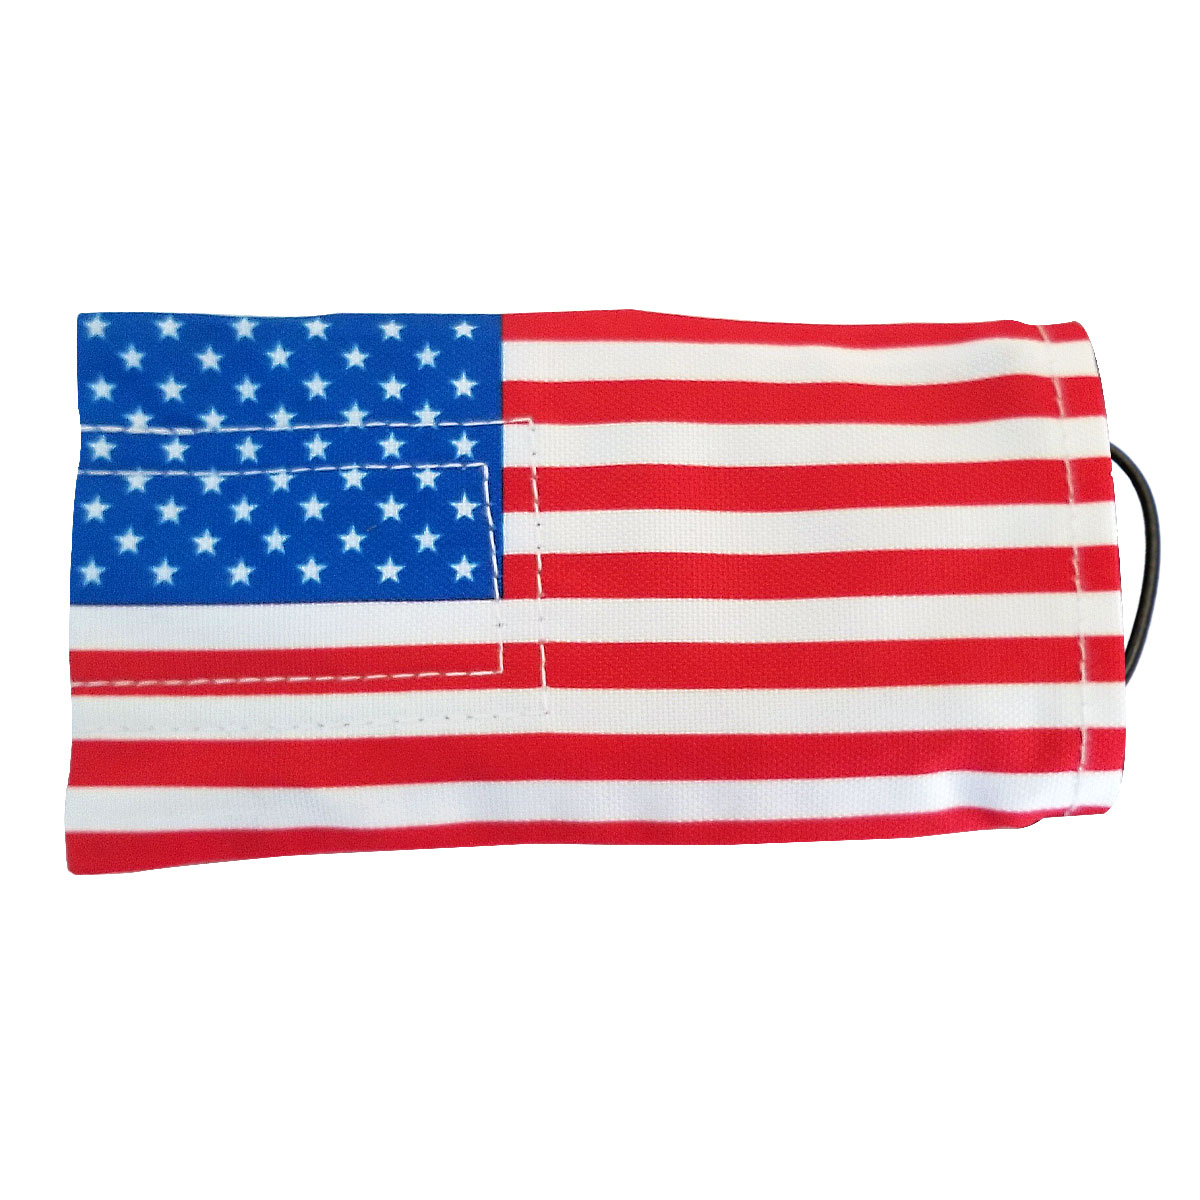 White Black Sock American Flag Grunge Details about   Fearless Paintball Barrel Cover 